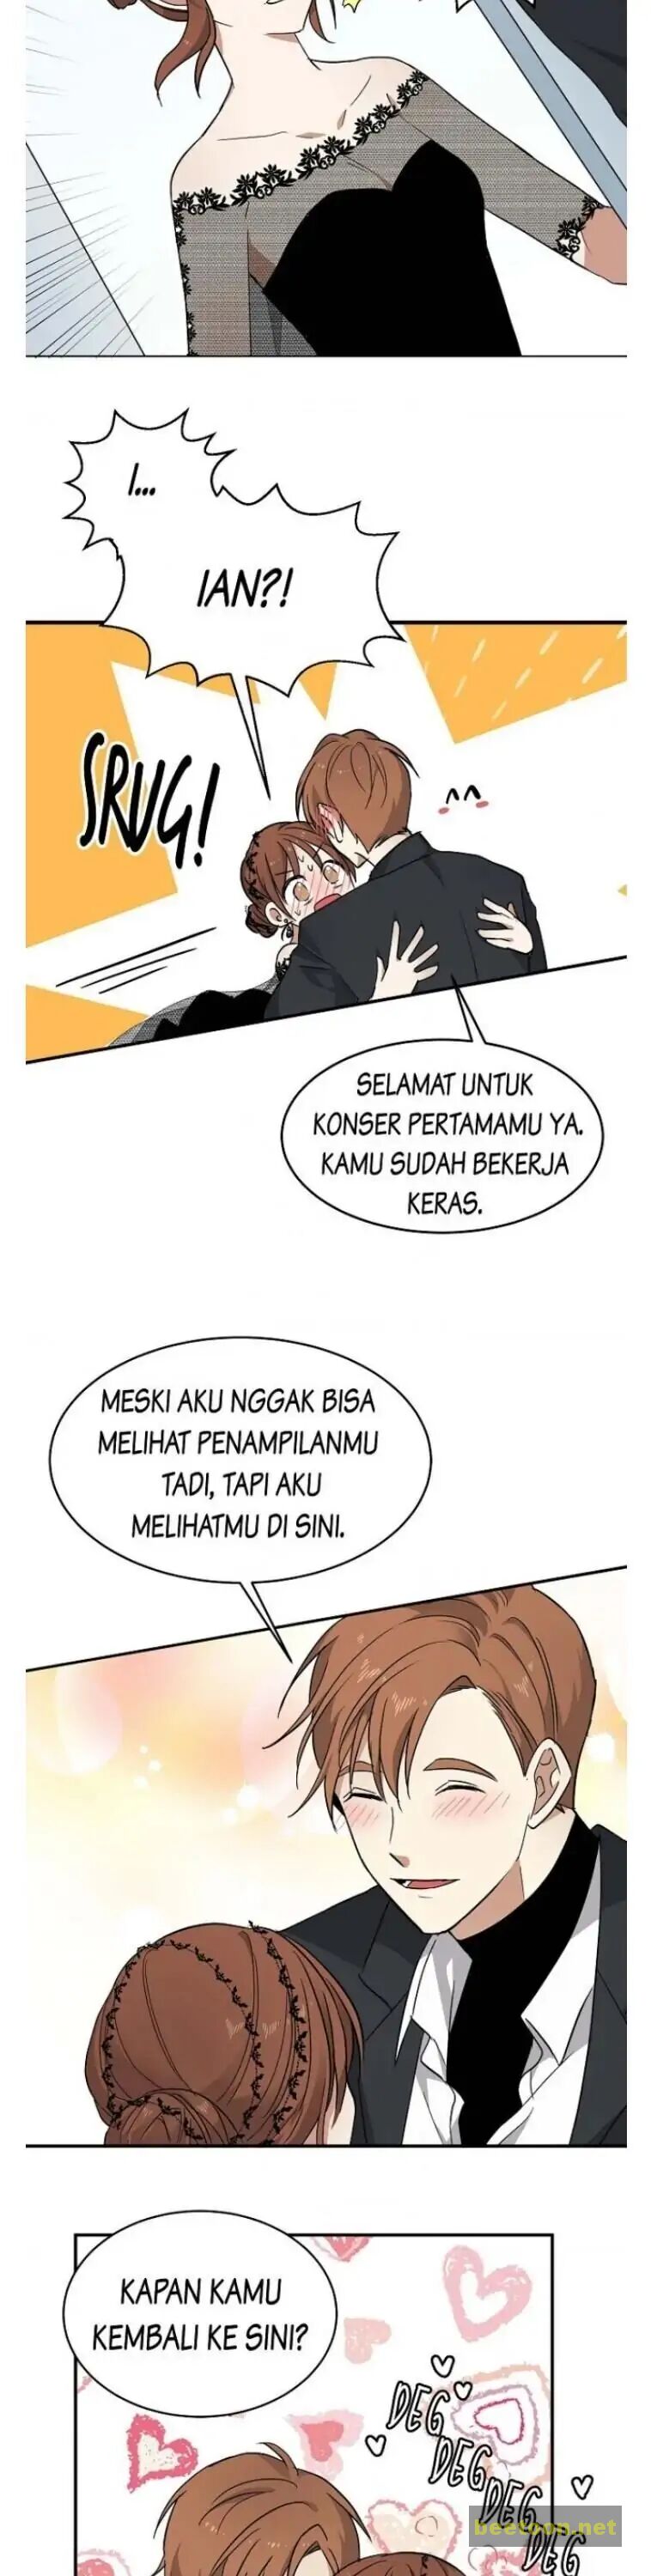 Delicious Scandal Chapter 59 - MyToon.net